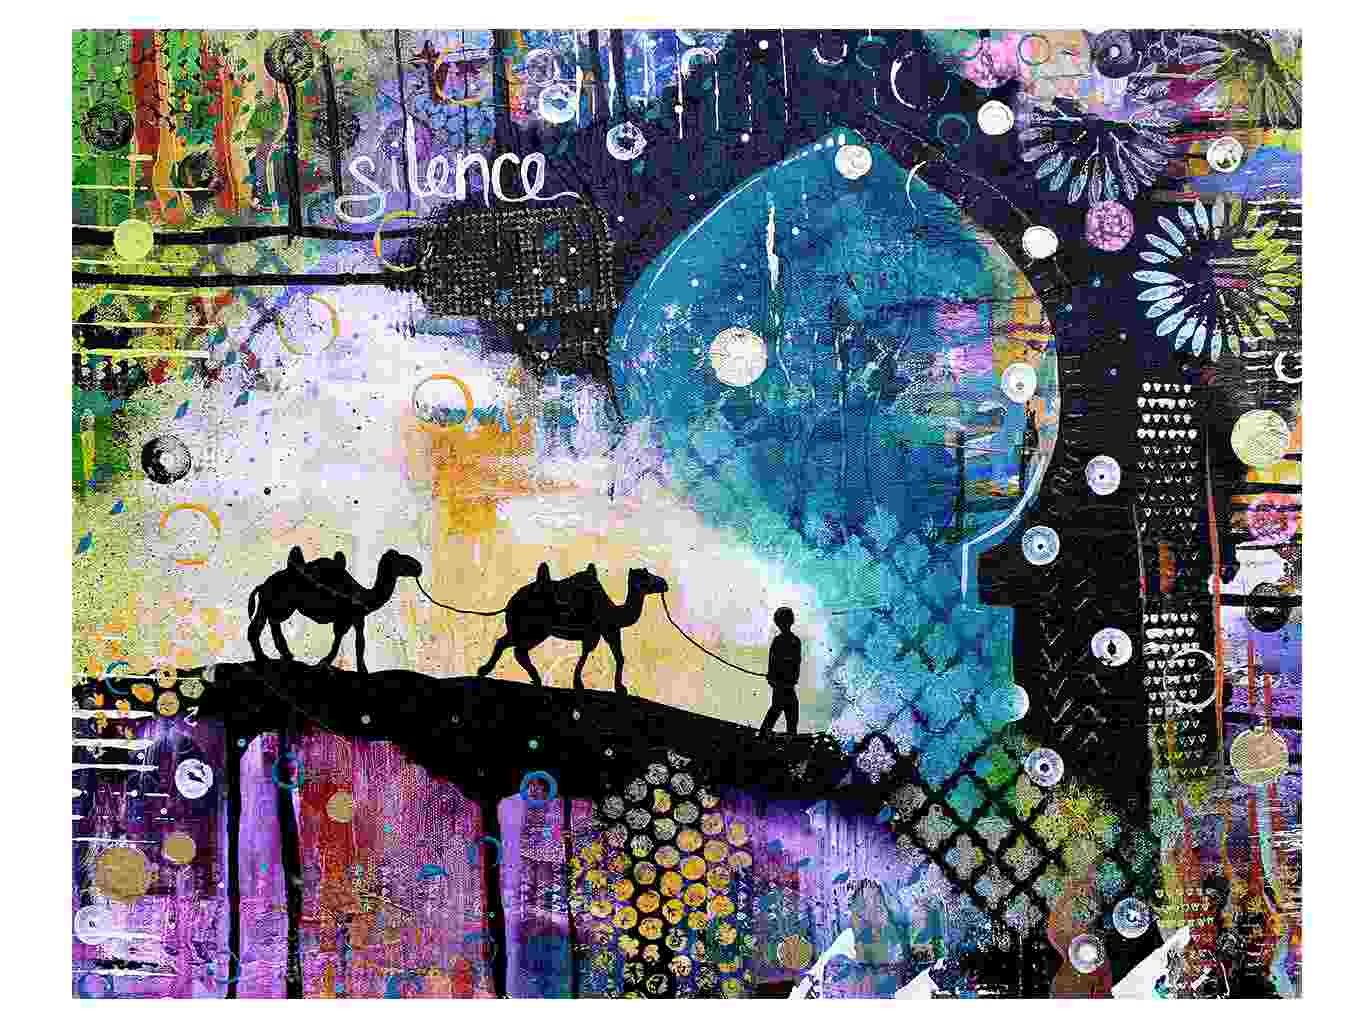 AM 101 Silence acrylic - painting - canvas - camels - desert - colorful - art - decor - ink - gold leaf - Audree Marsolais (2)